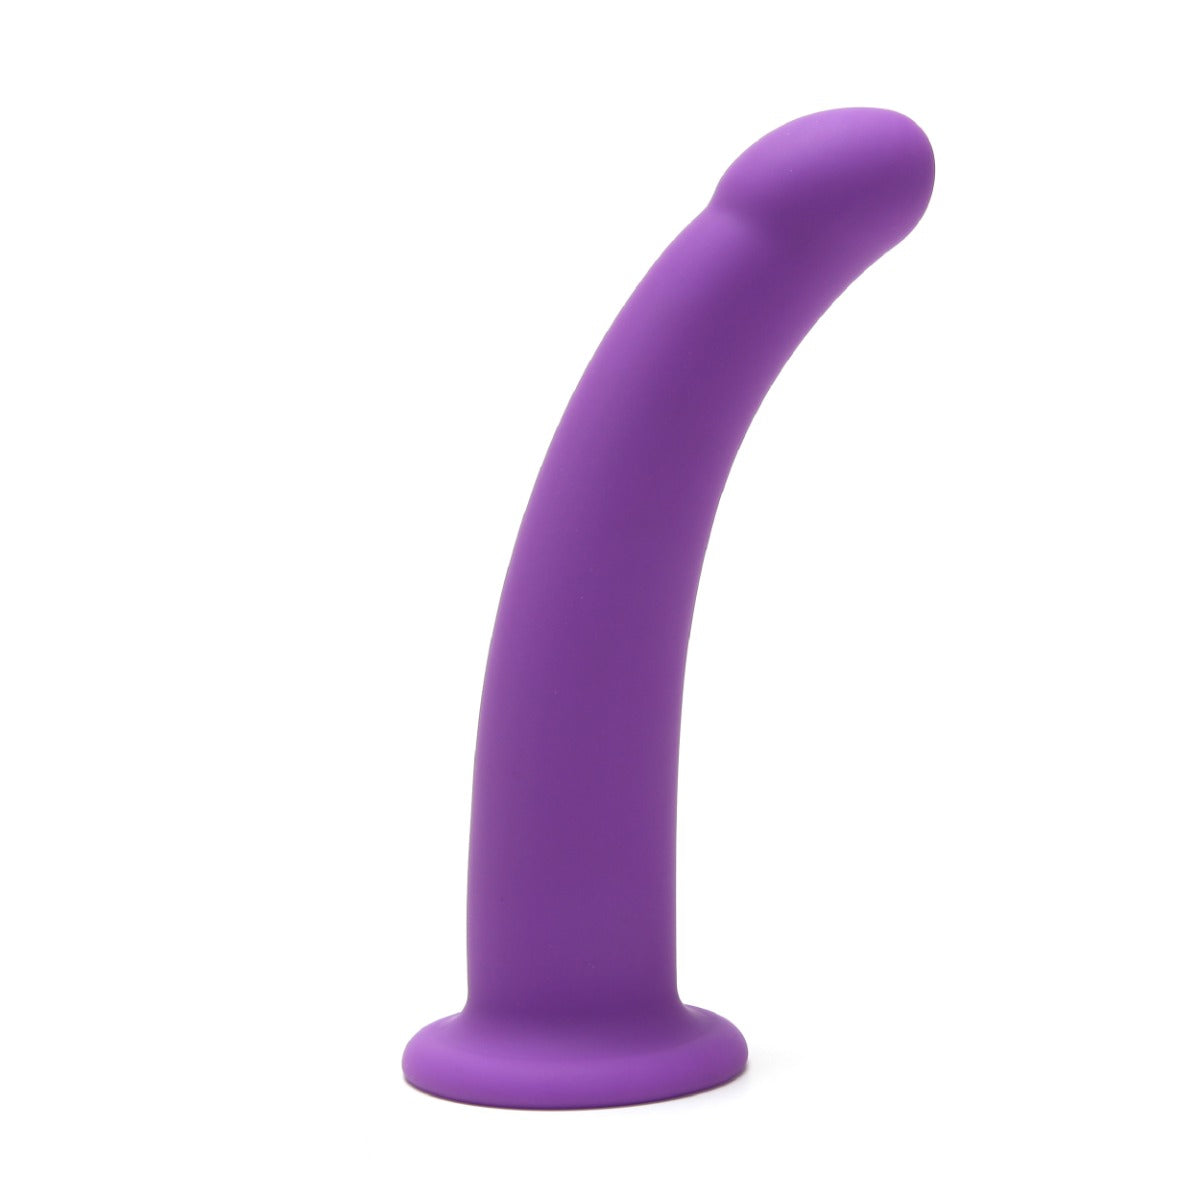 a purple object is shown on a white background